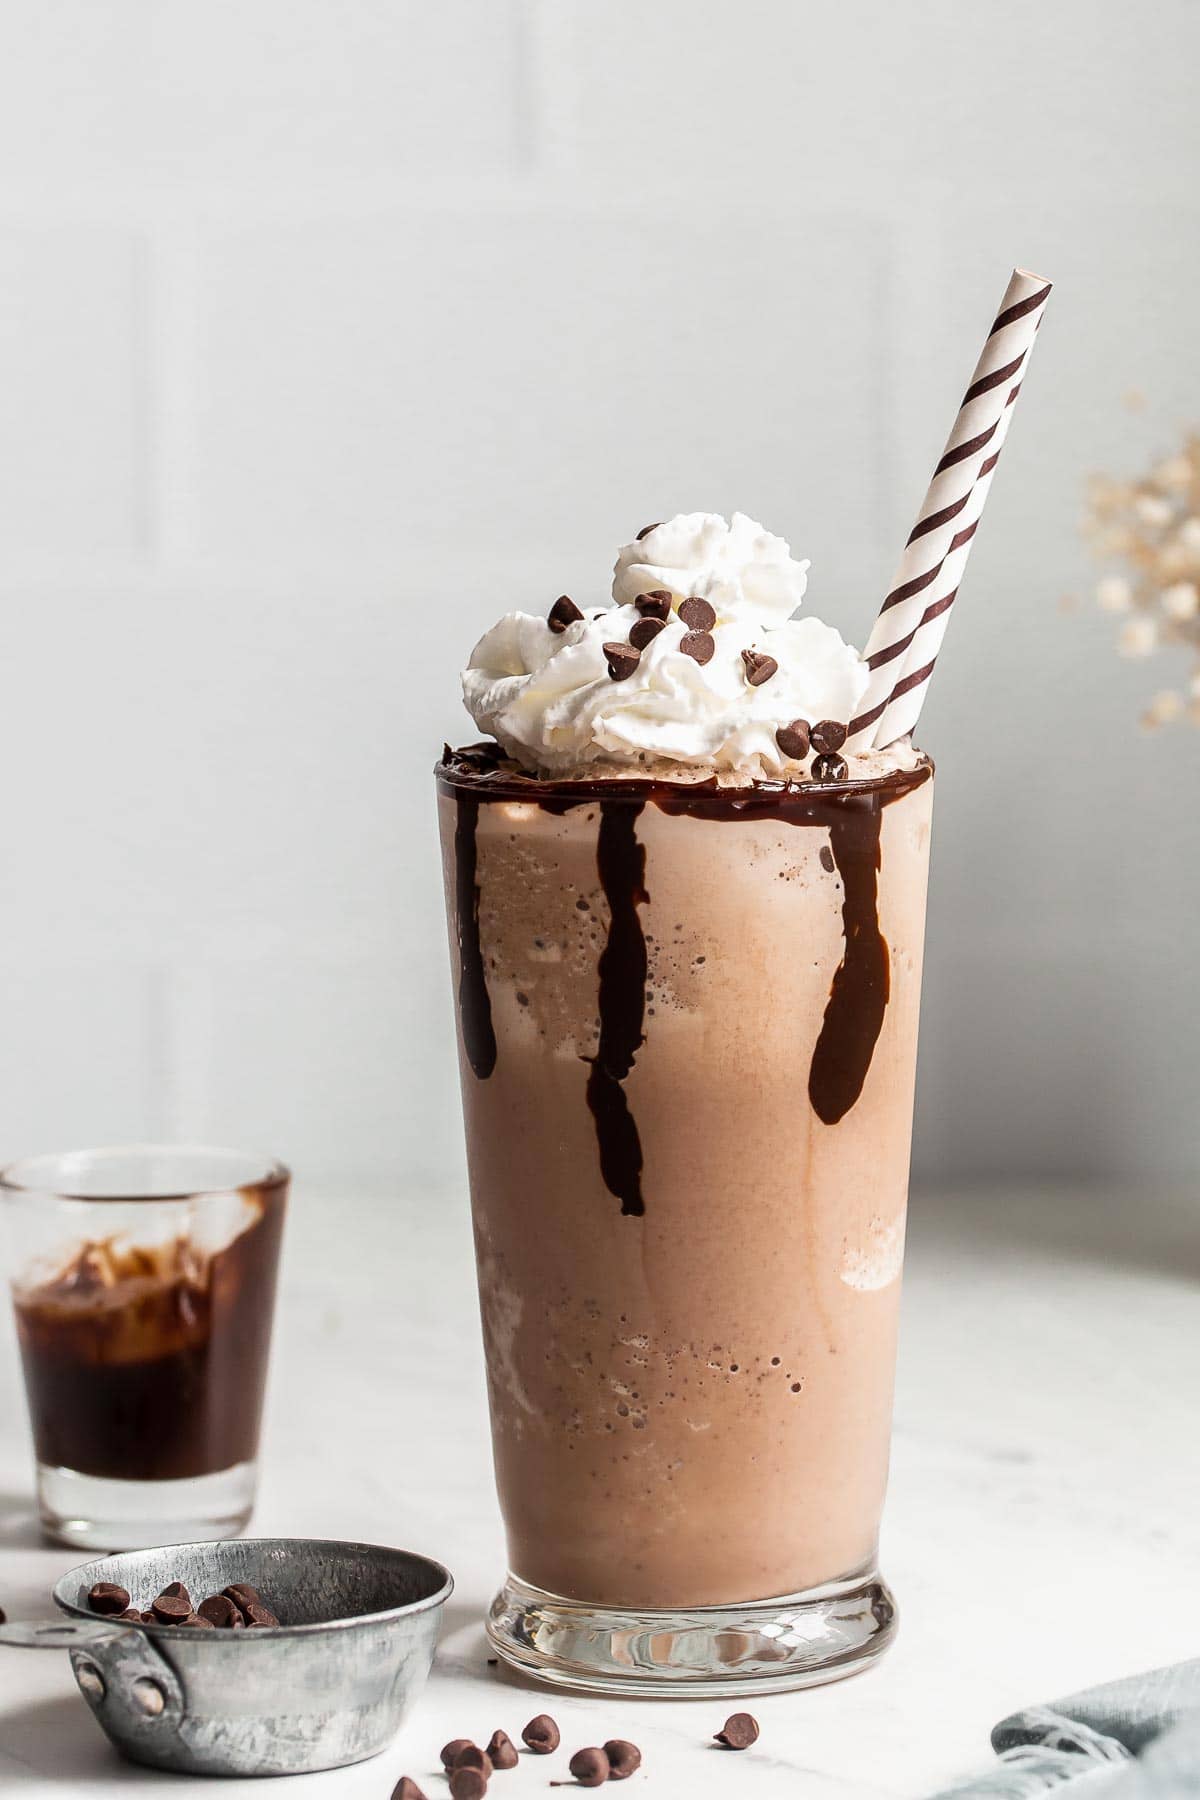 Chocolate chip frappe in a glass garnished with whipped cream and chocolate chips.